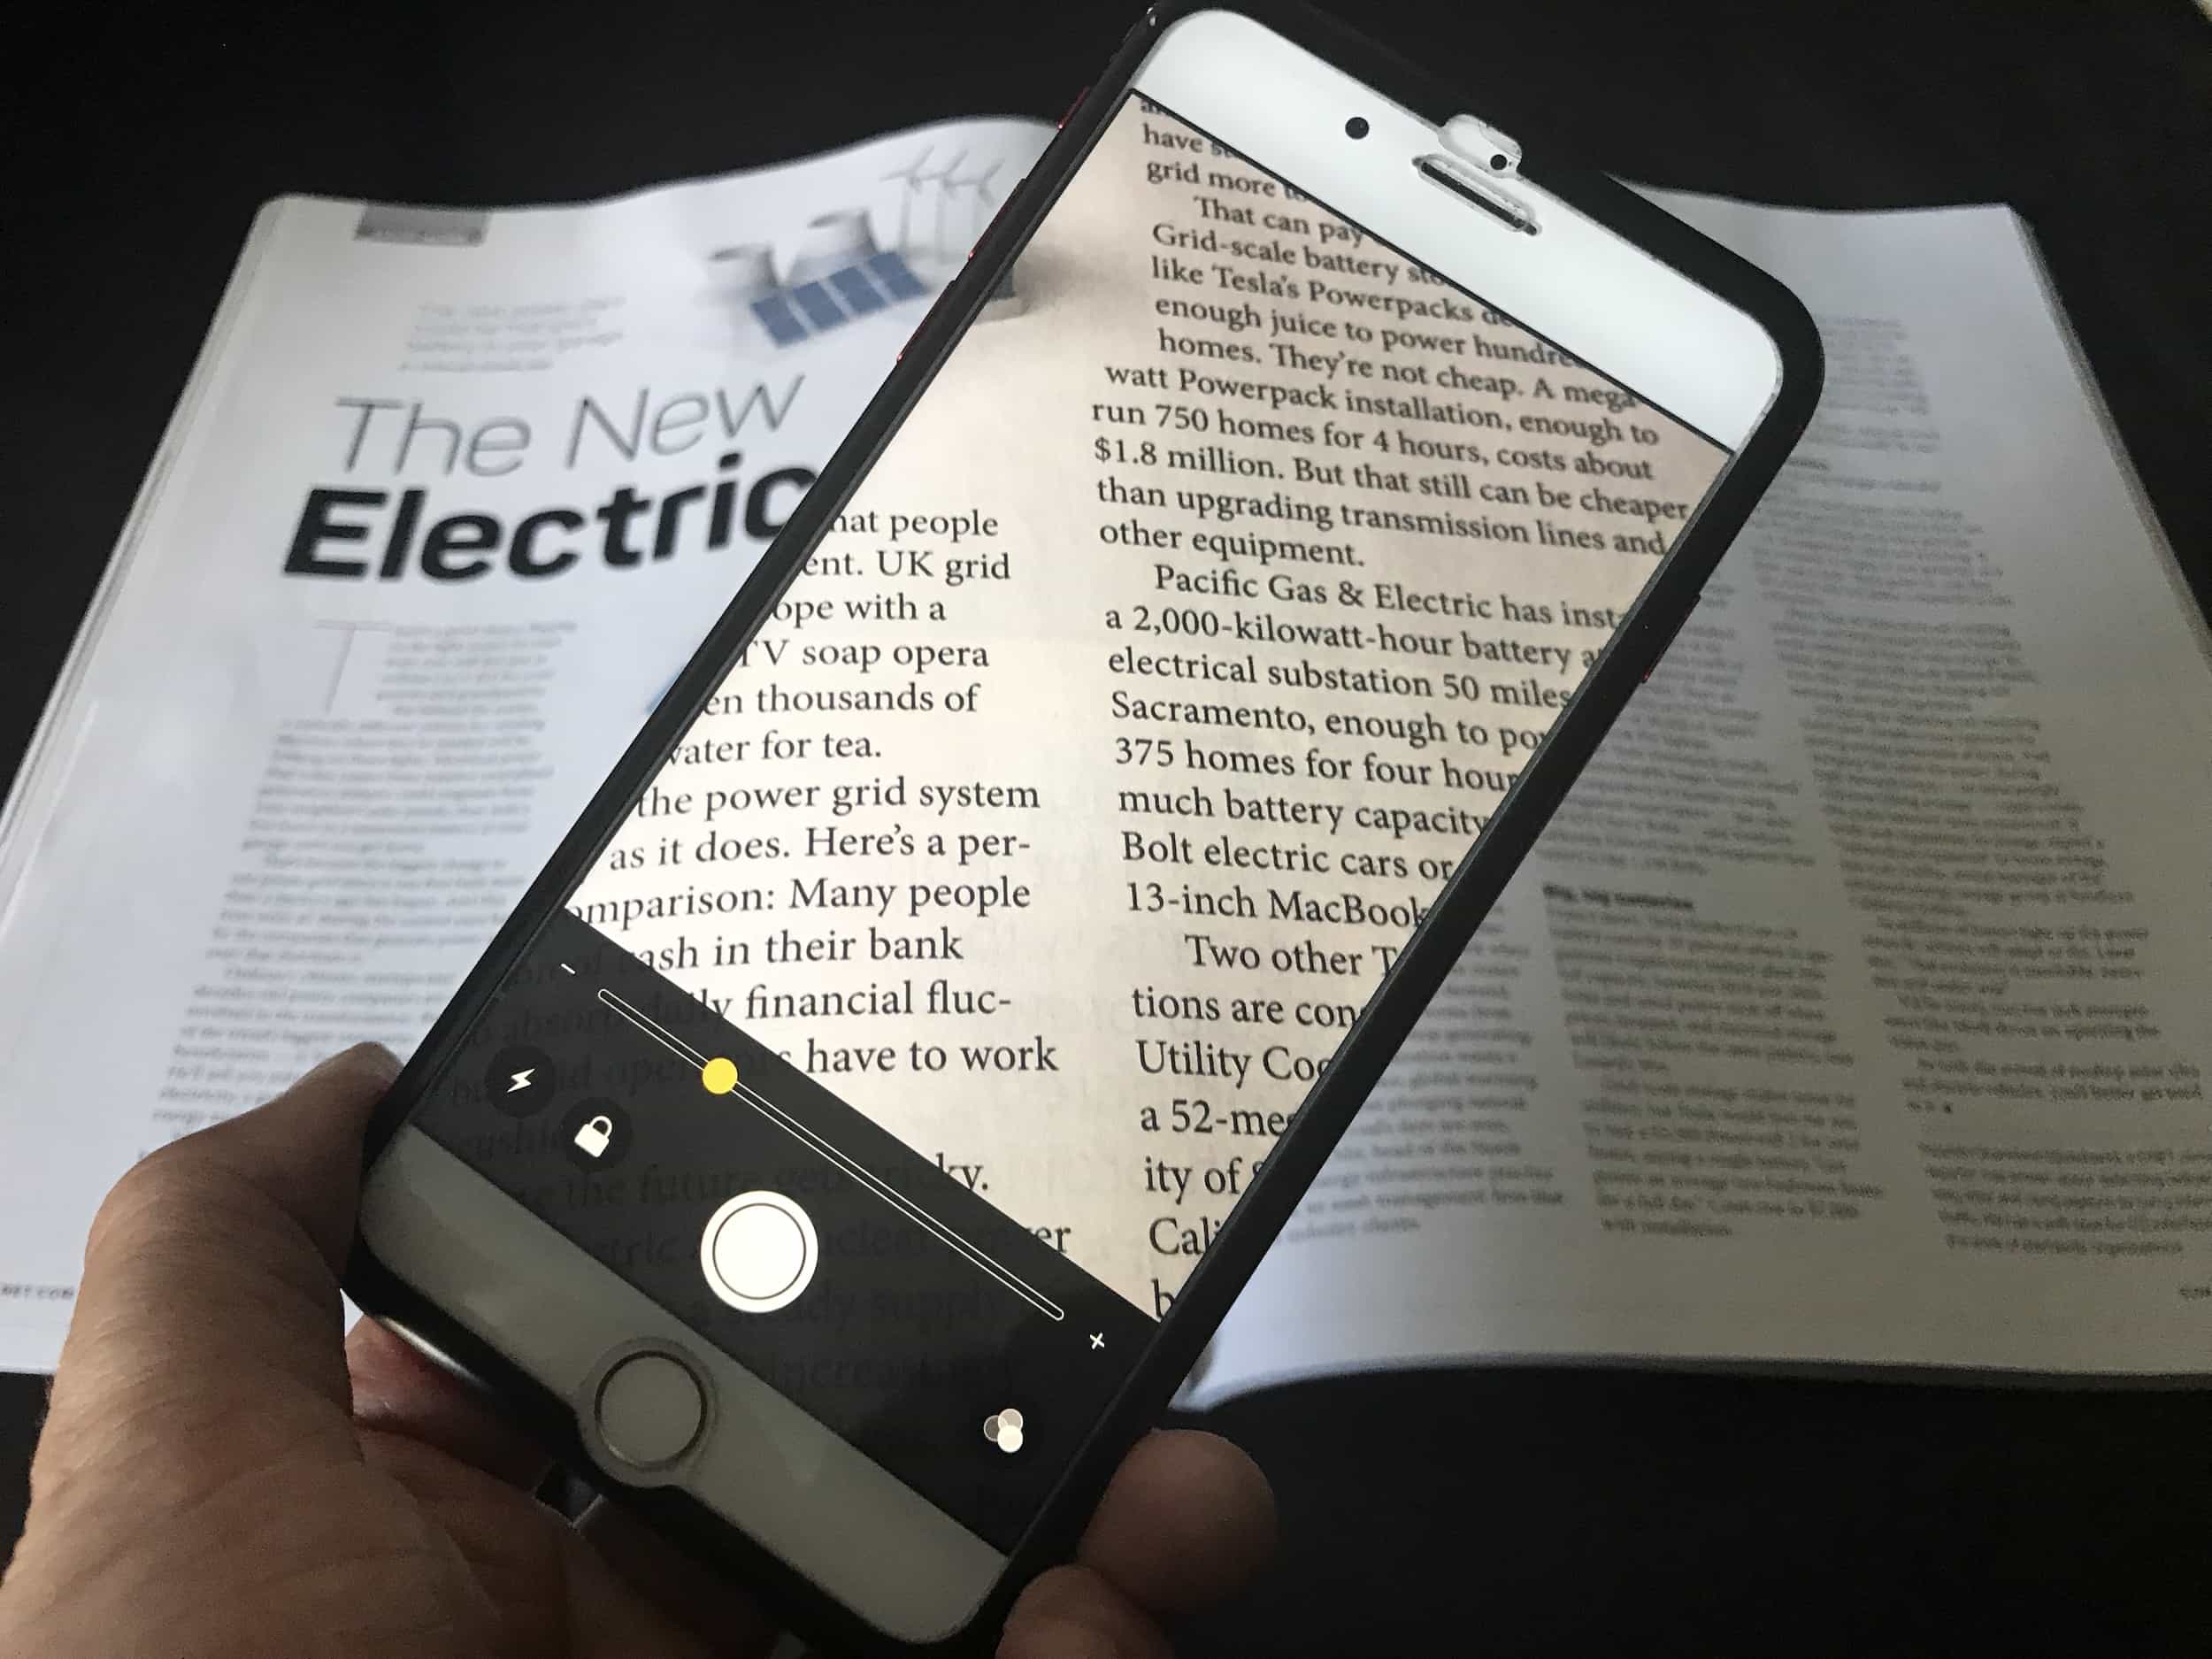 The iOS Magnifier: You probably had no idea your iPhone has a built-in magnifying glass.